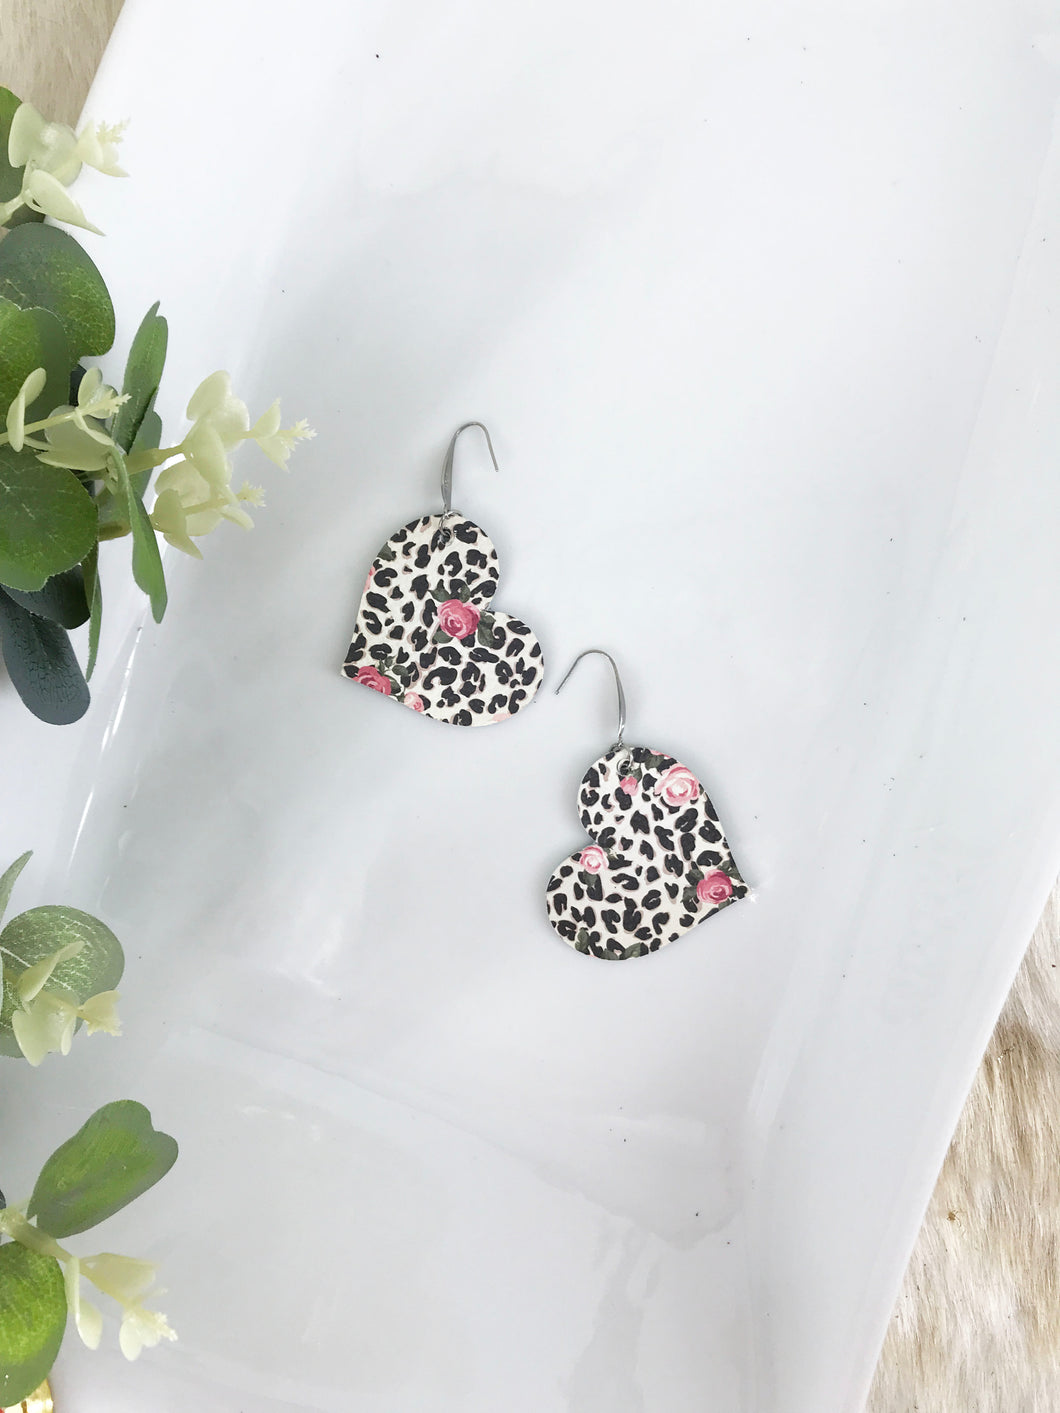 Roses over Black Spotted Leopard Leather Earrings - E19-1744